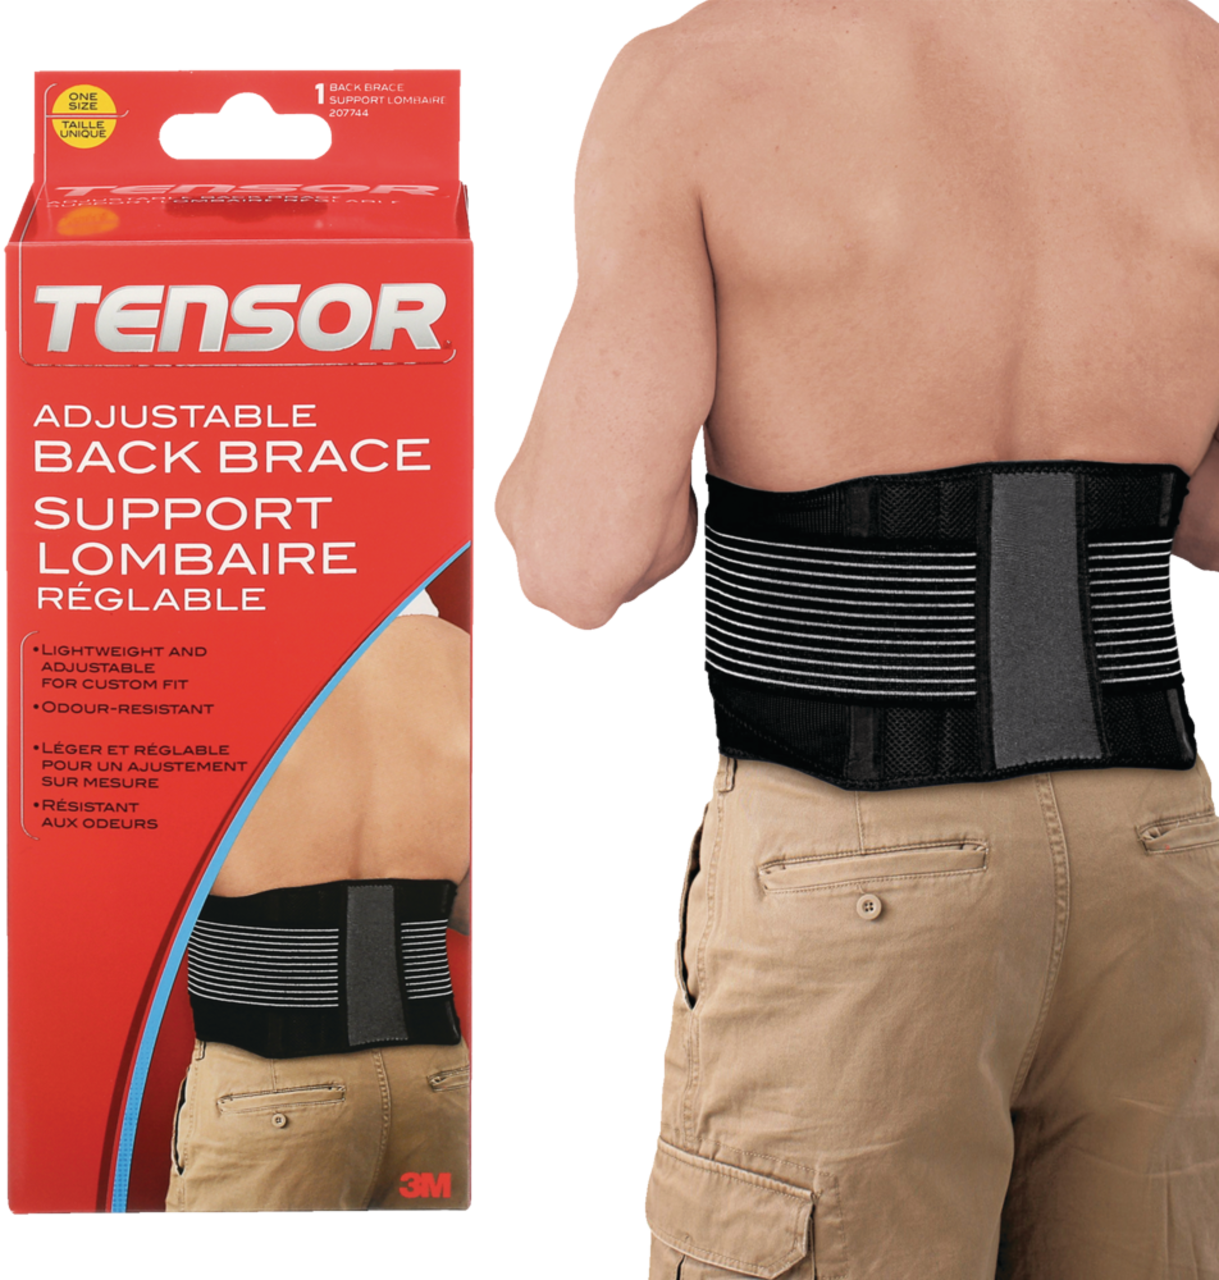 Back Support Belt, Elastic, North Deluxe Ventilated - Small